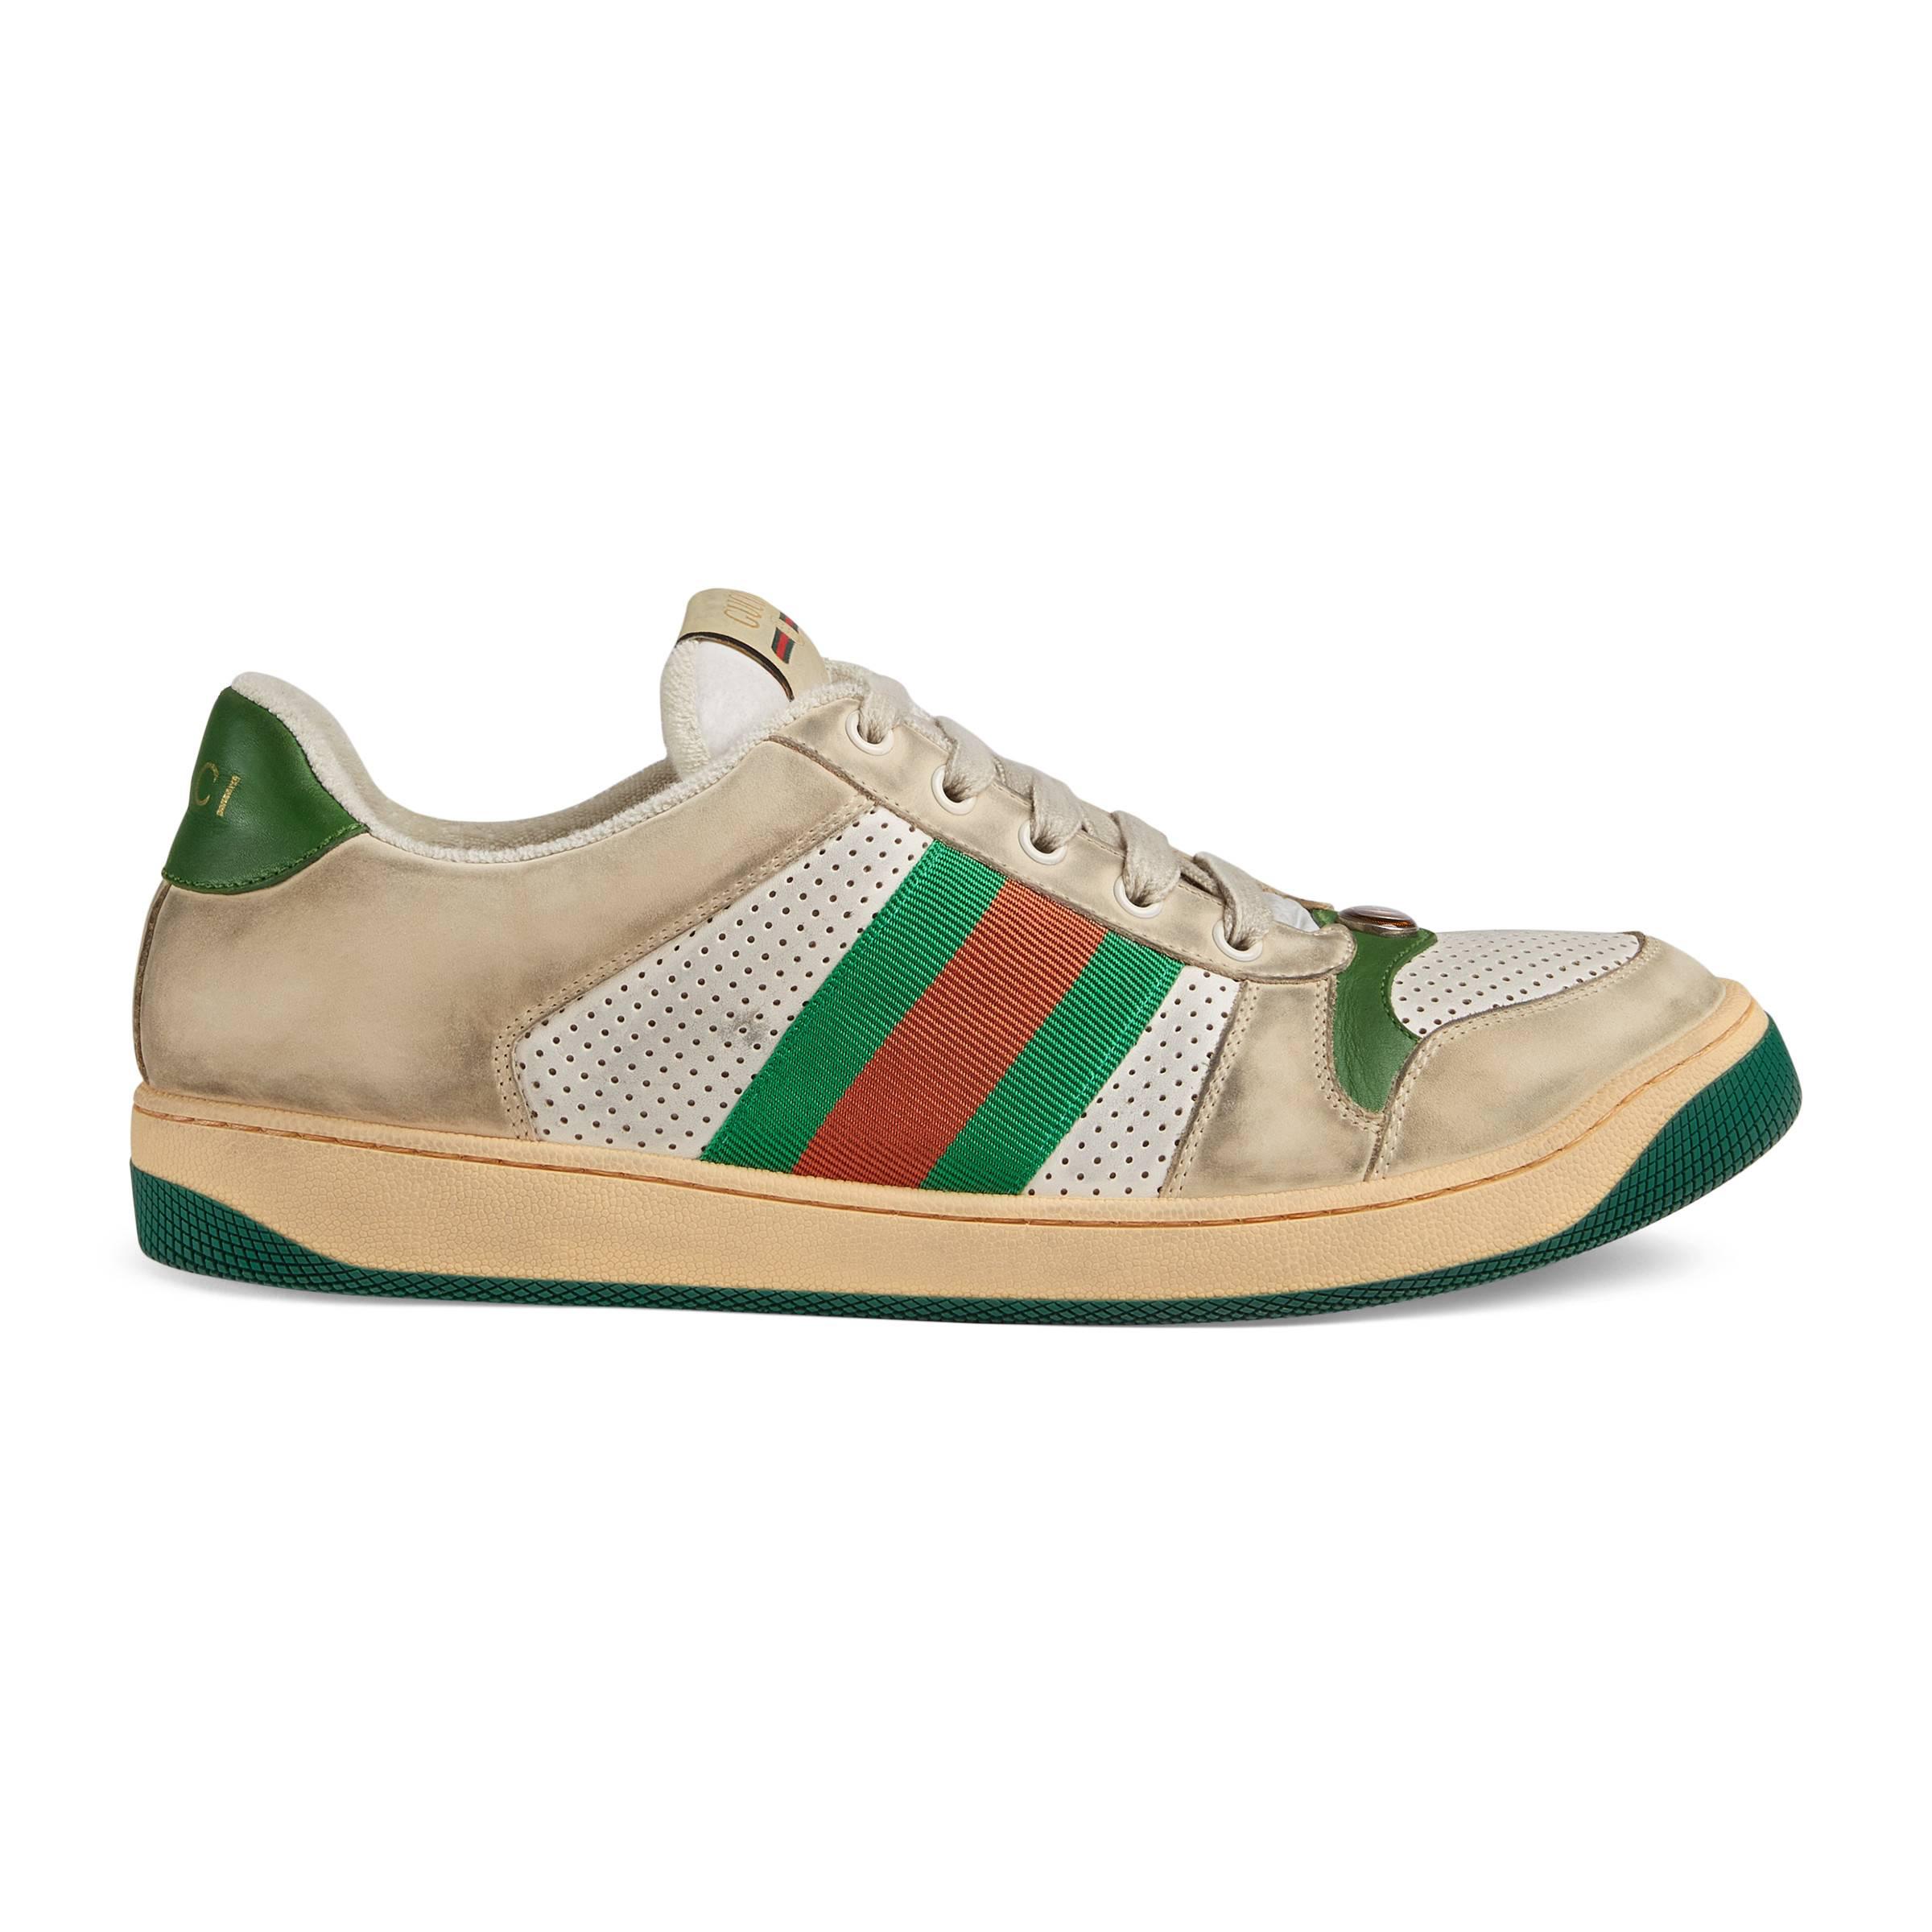 Gucci Screener Leather Sneaker in White for Men - Save 21% - Lyst